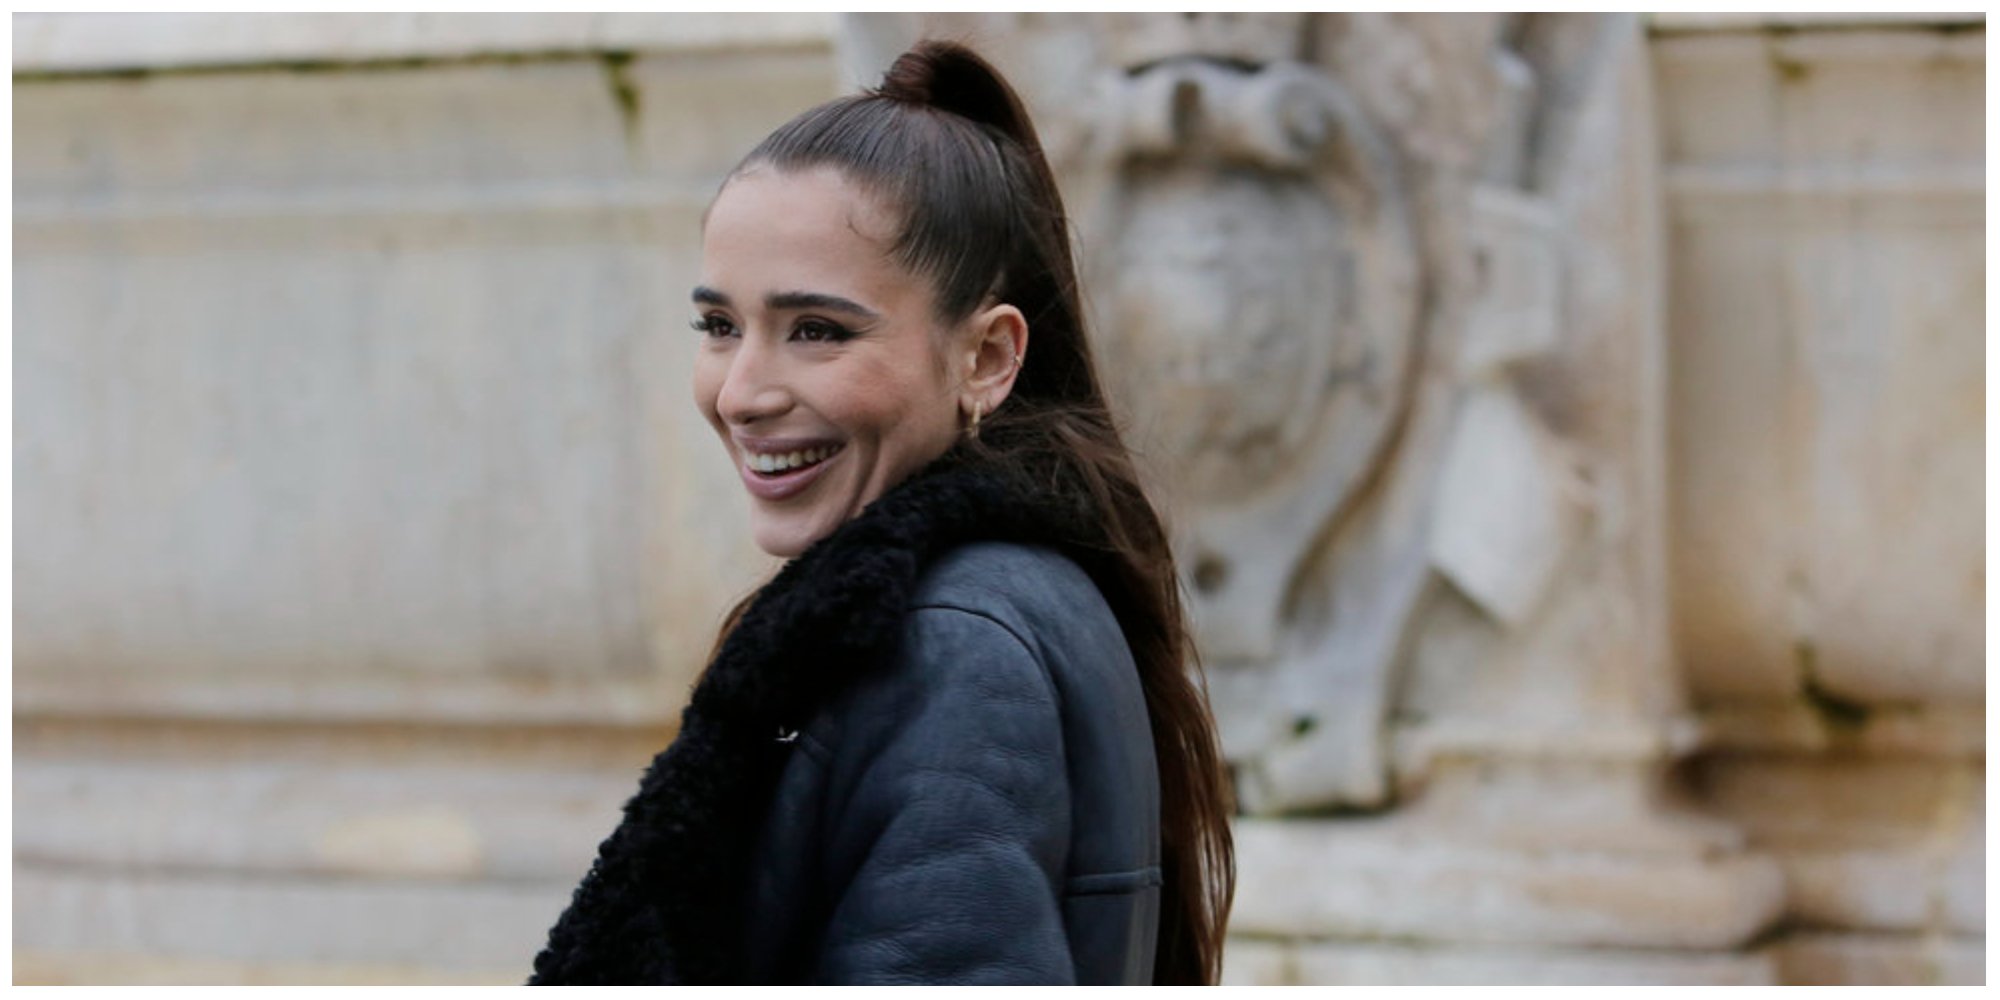 Margaux Lignel from 'Real Girlfriends in Paris' smiles while wearing a black jacket and hair in a ponytail